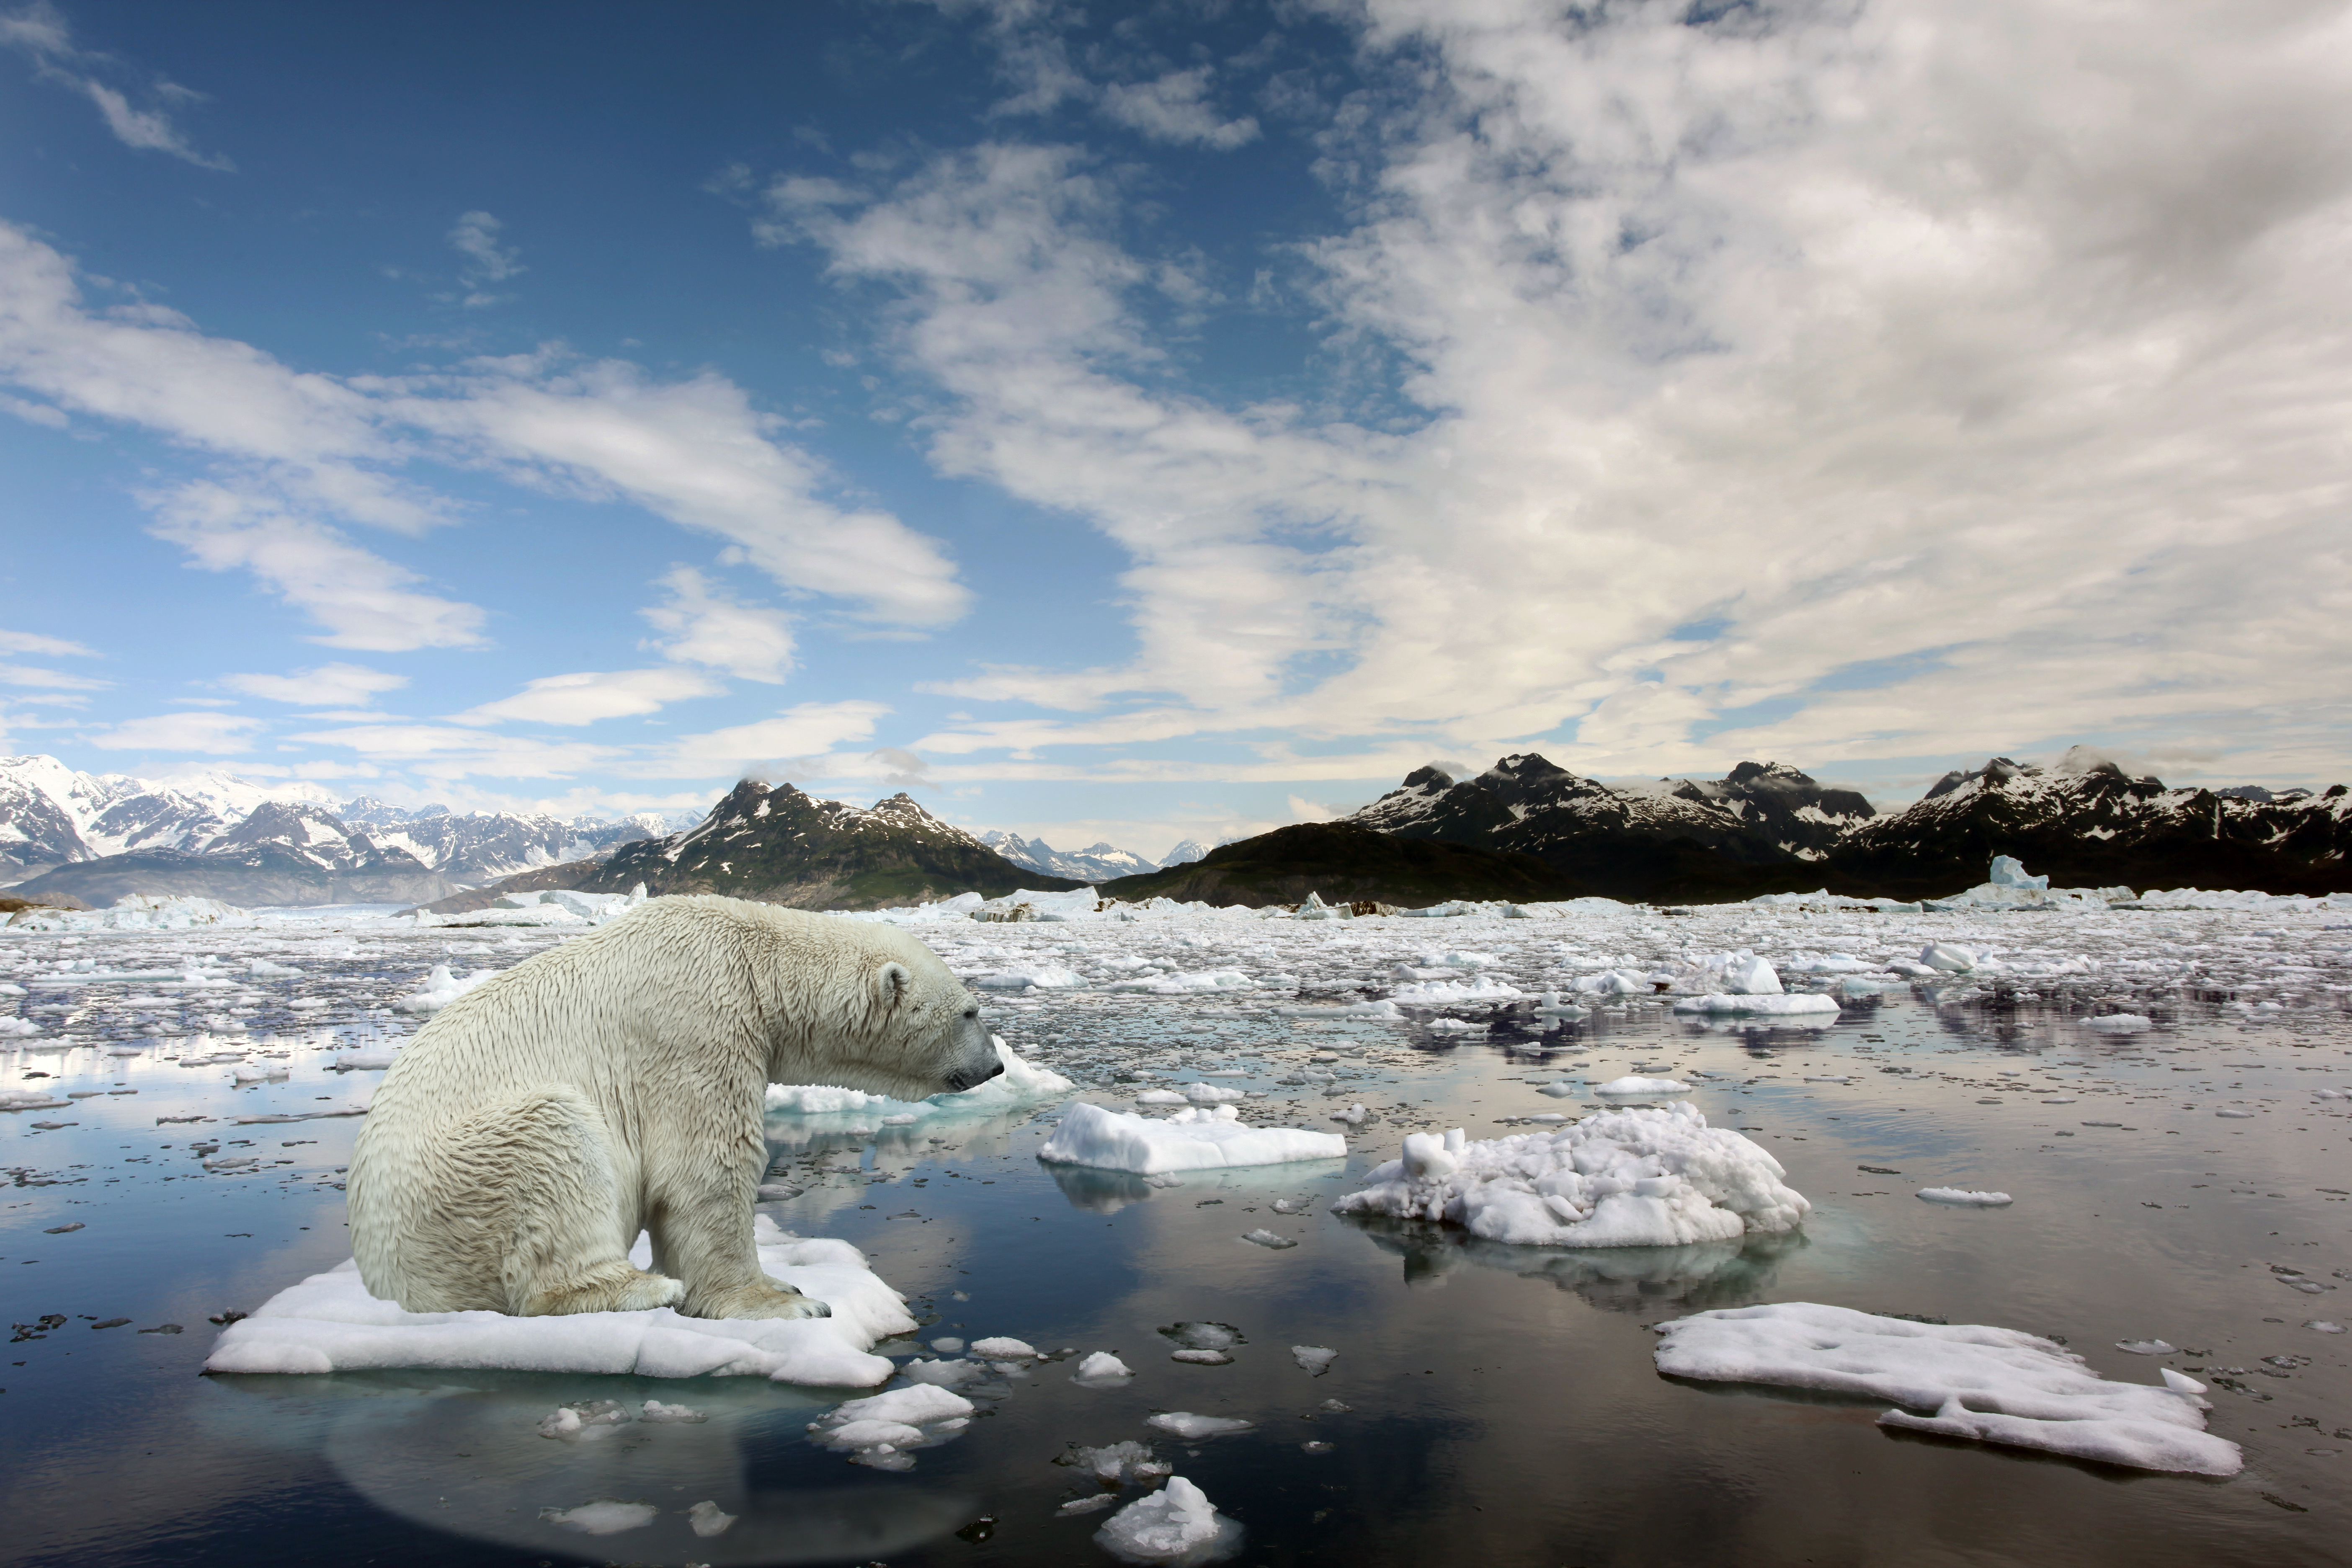 Global Warming: The Imminent Crisis That Never Arrives